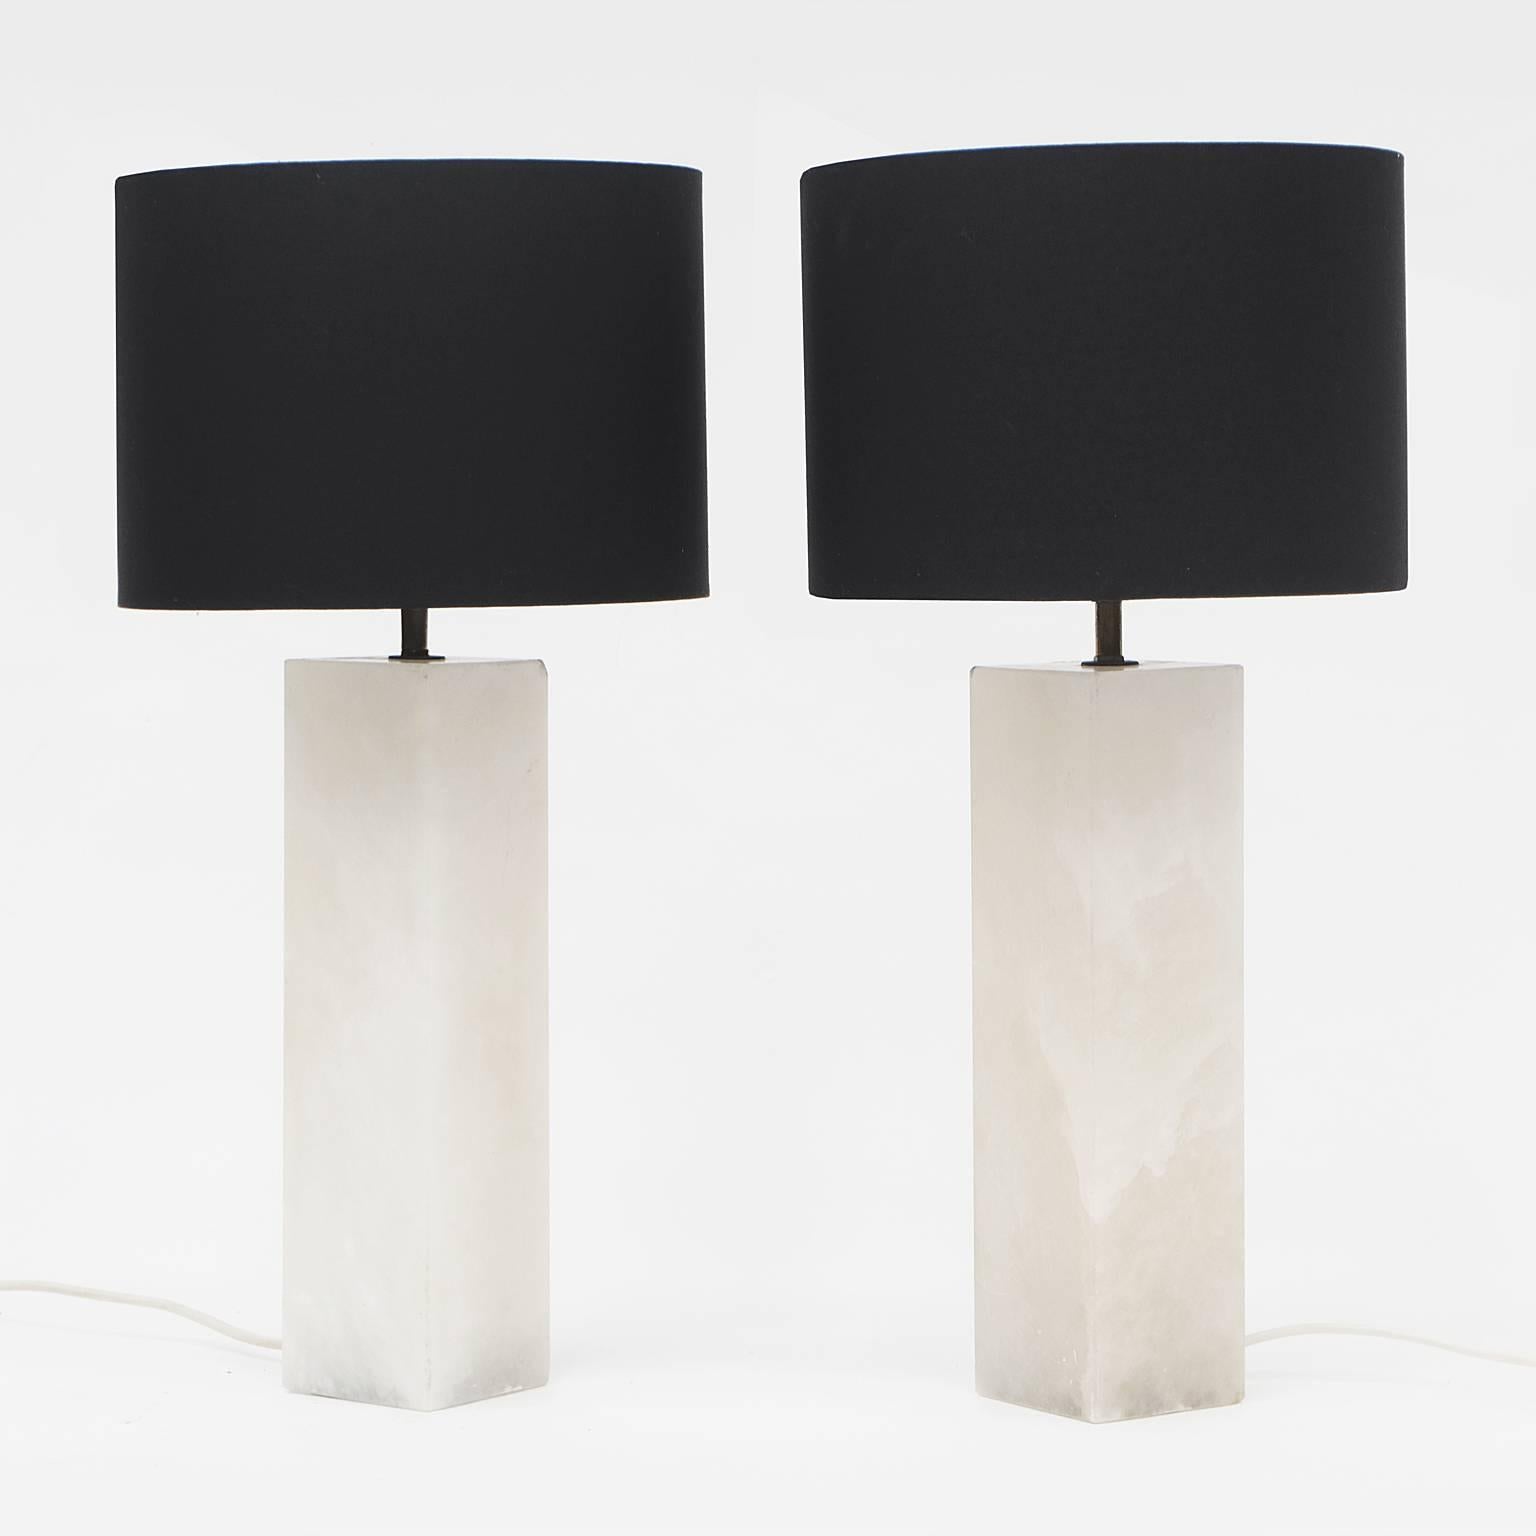 Pair of white onyx table lamps designed and manufactured in Italy.

White onyx column bases with brass fittings. Black drum shades.

With shade: H 58cm x D 28cm
Without shade: H 45cm x D 9cm

Each lamp weighs an impressive 8 kilos each.